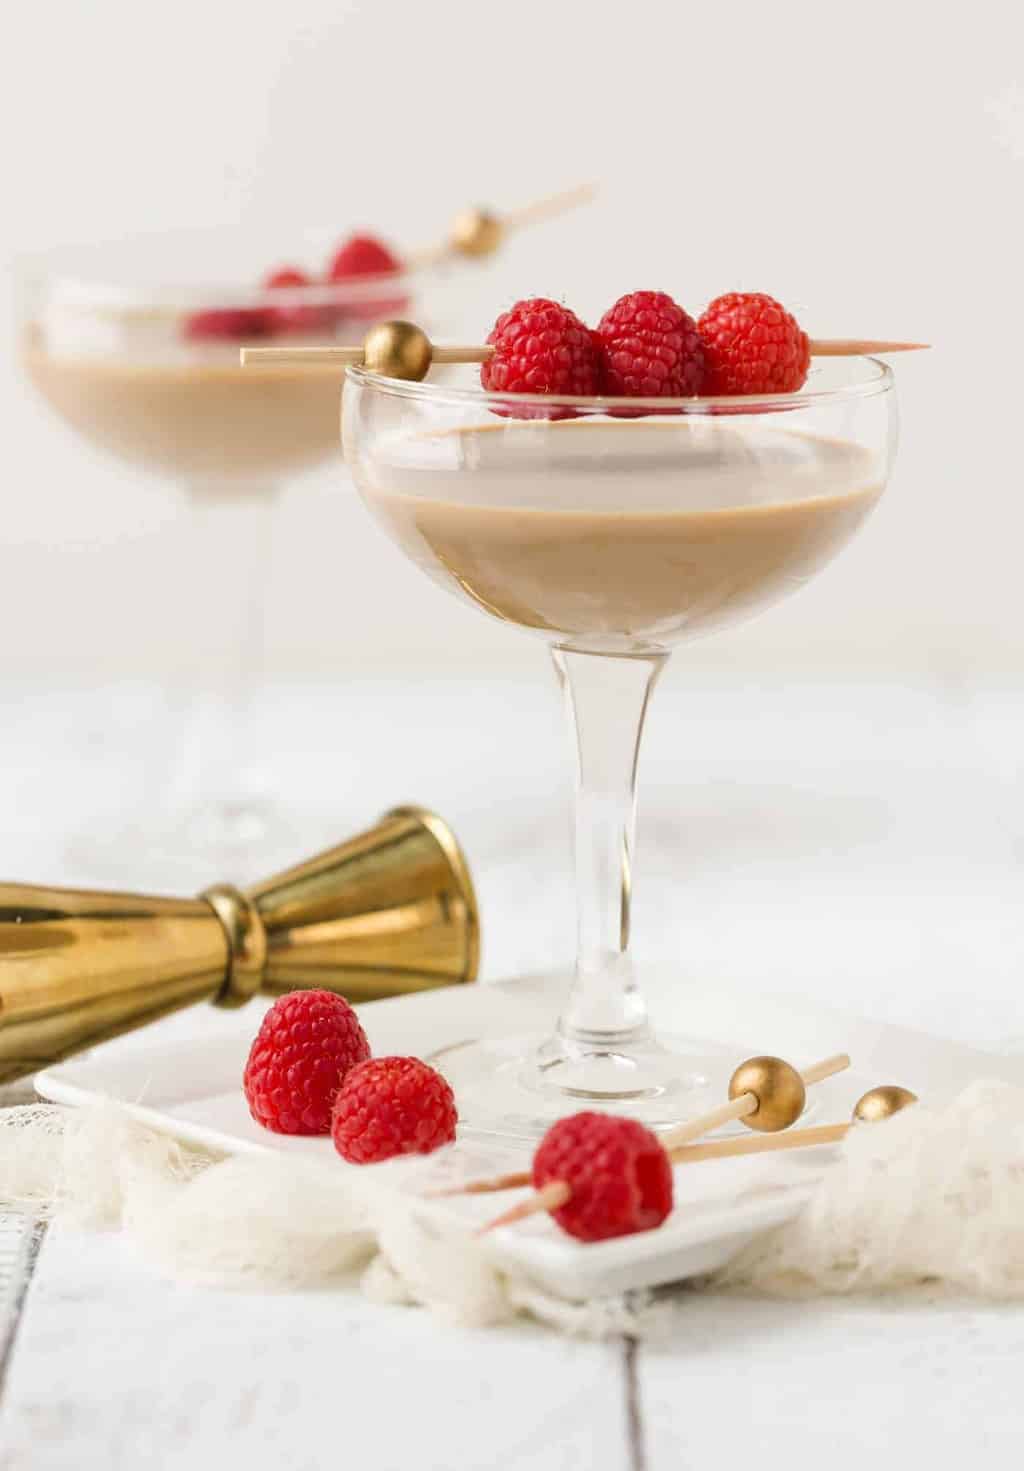 Chocolate Raspberry Martinis in coupe glasses with fresh raspberries threaded on skewer for garnish.